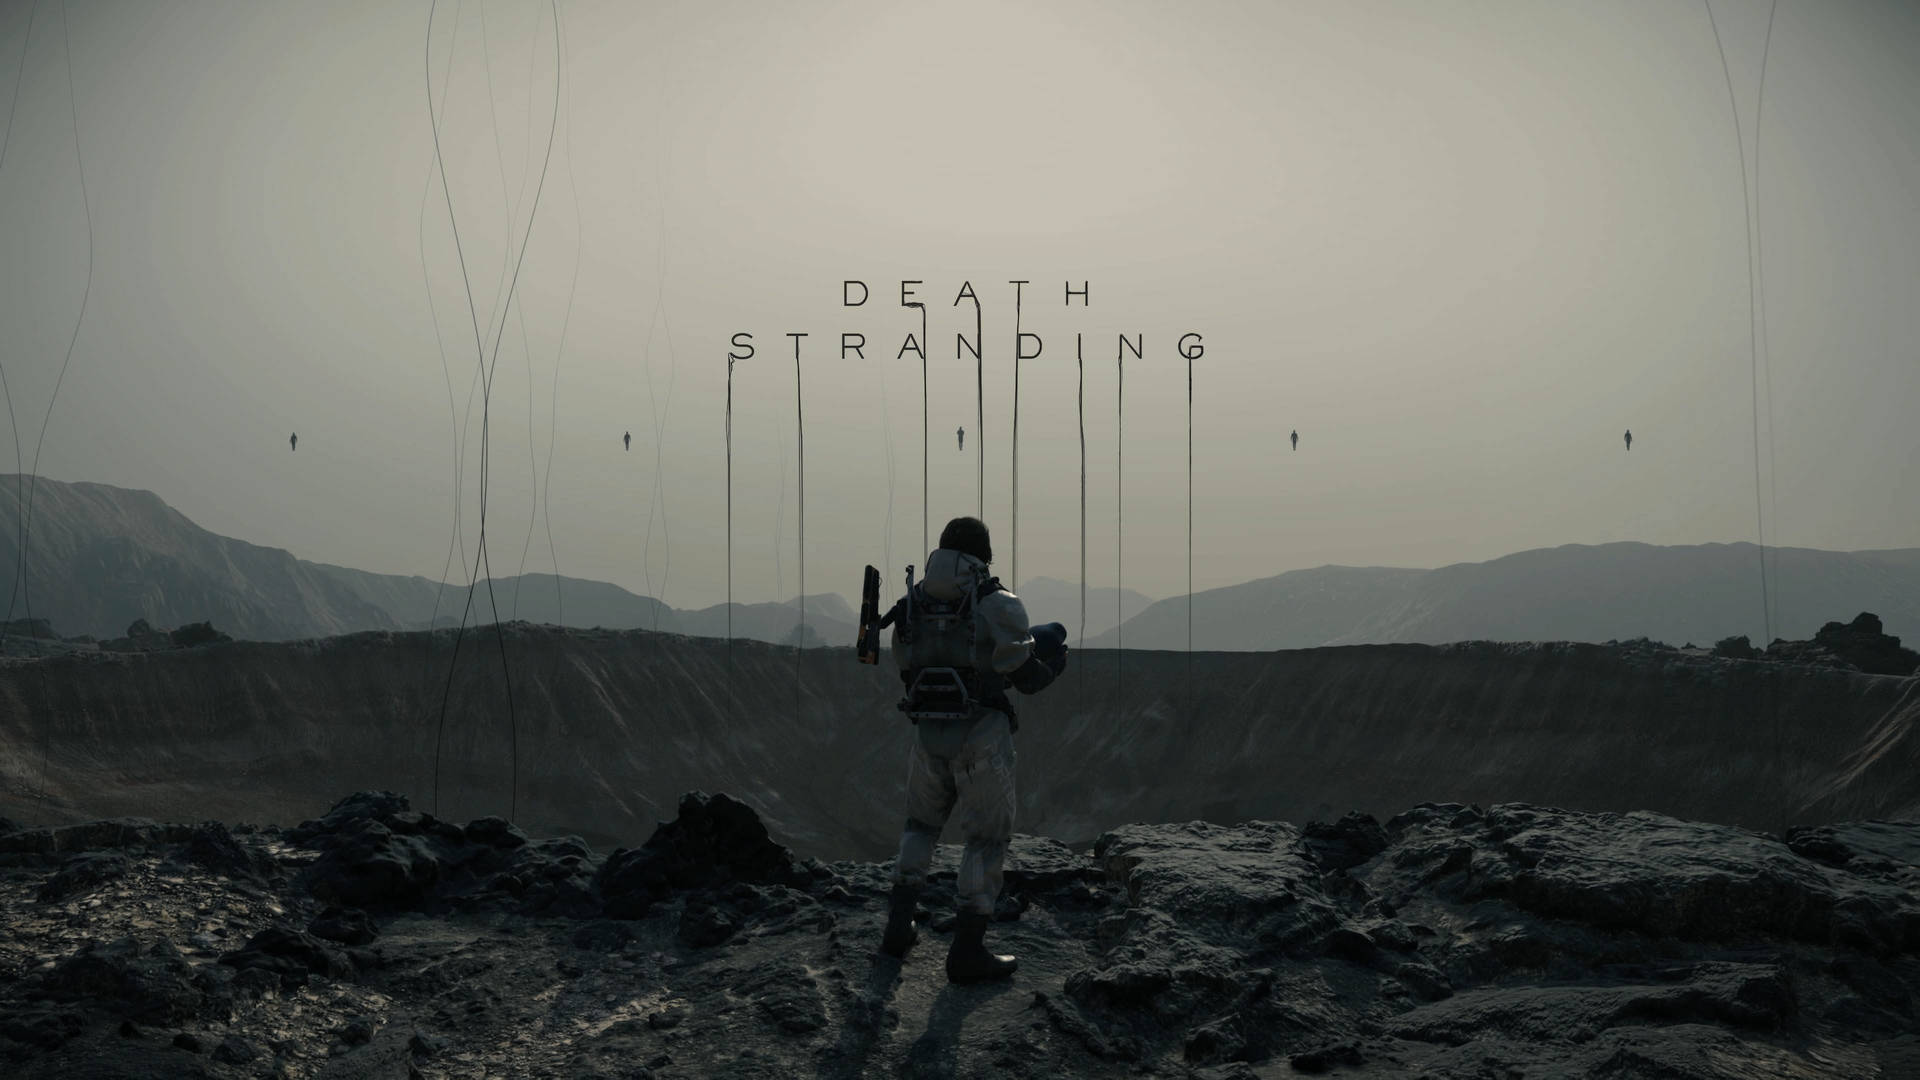 Top 999+ Death Stranding Wallpaper Full HD, 4K✅Free to Use